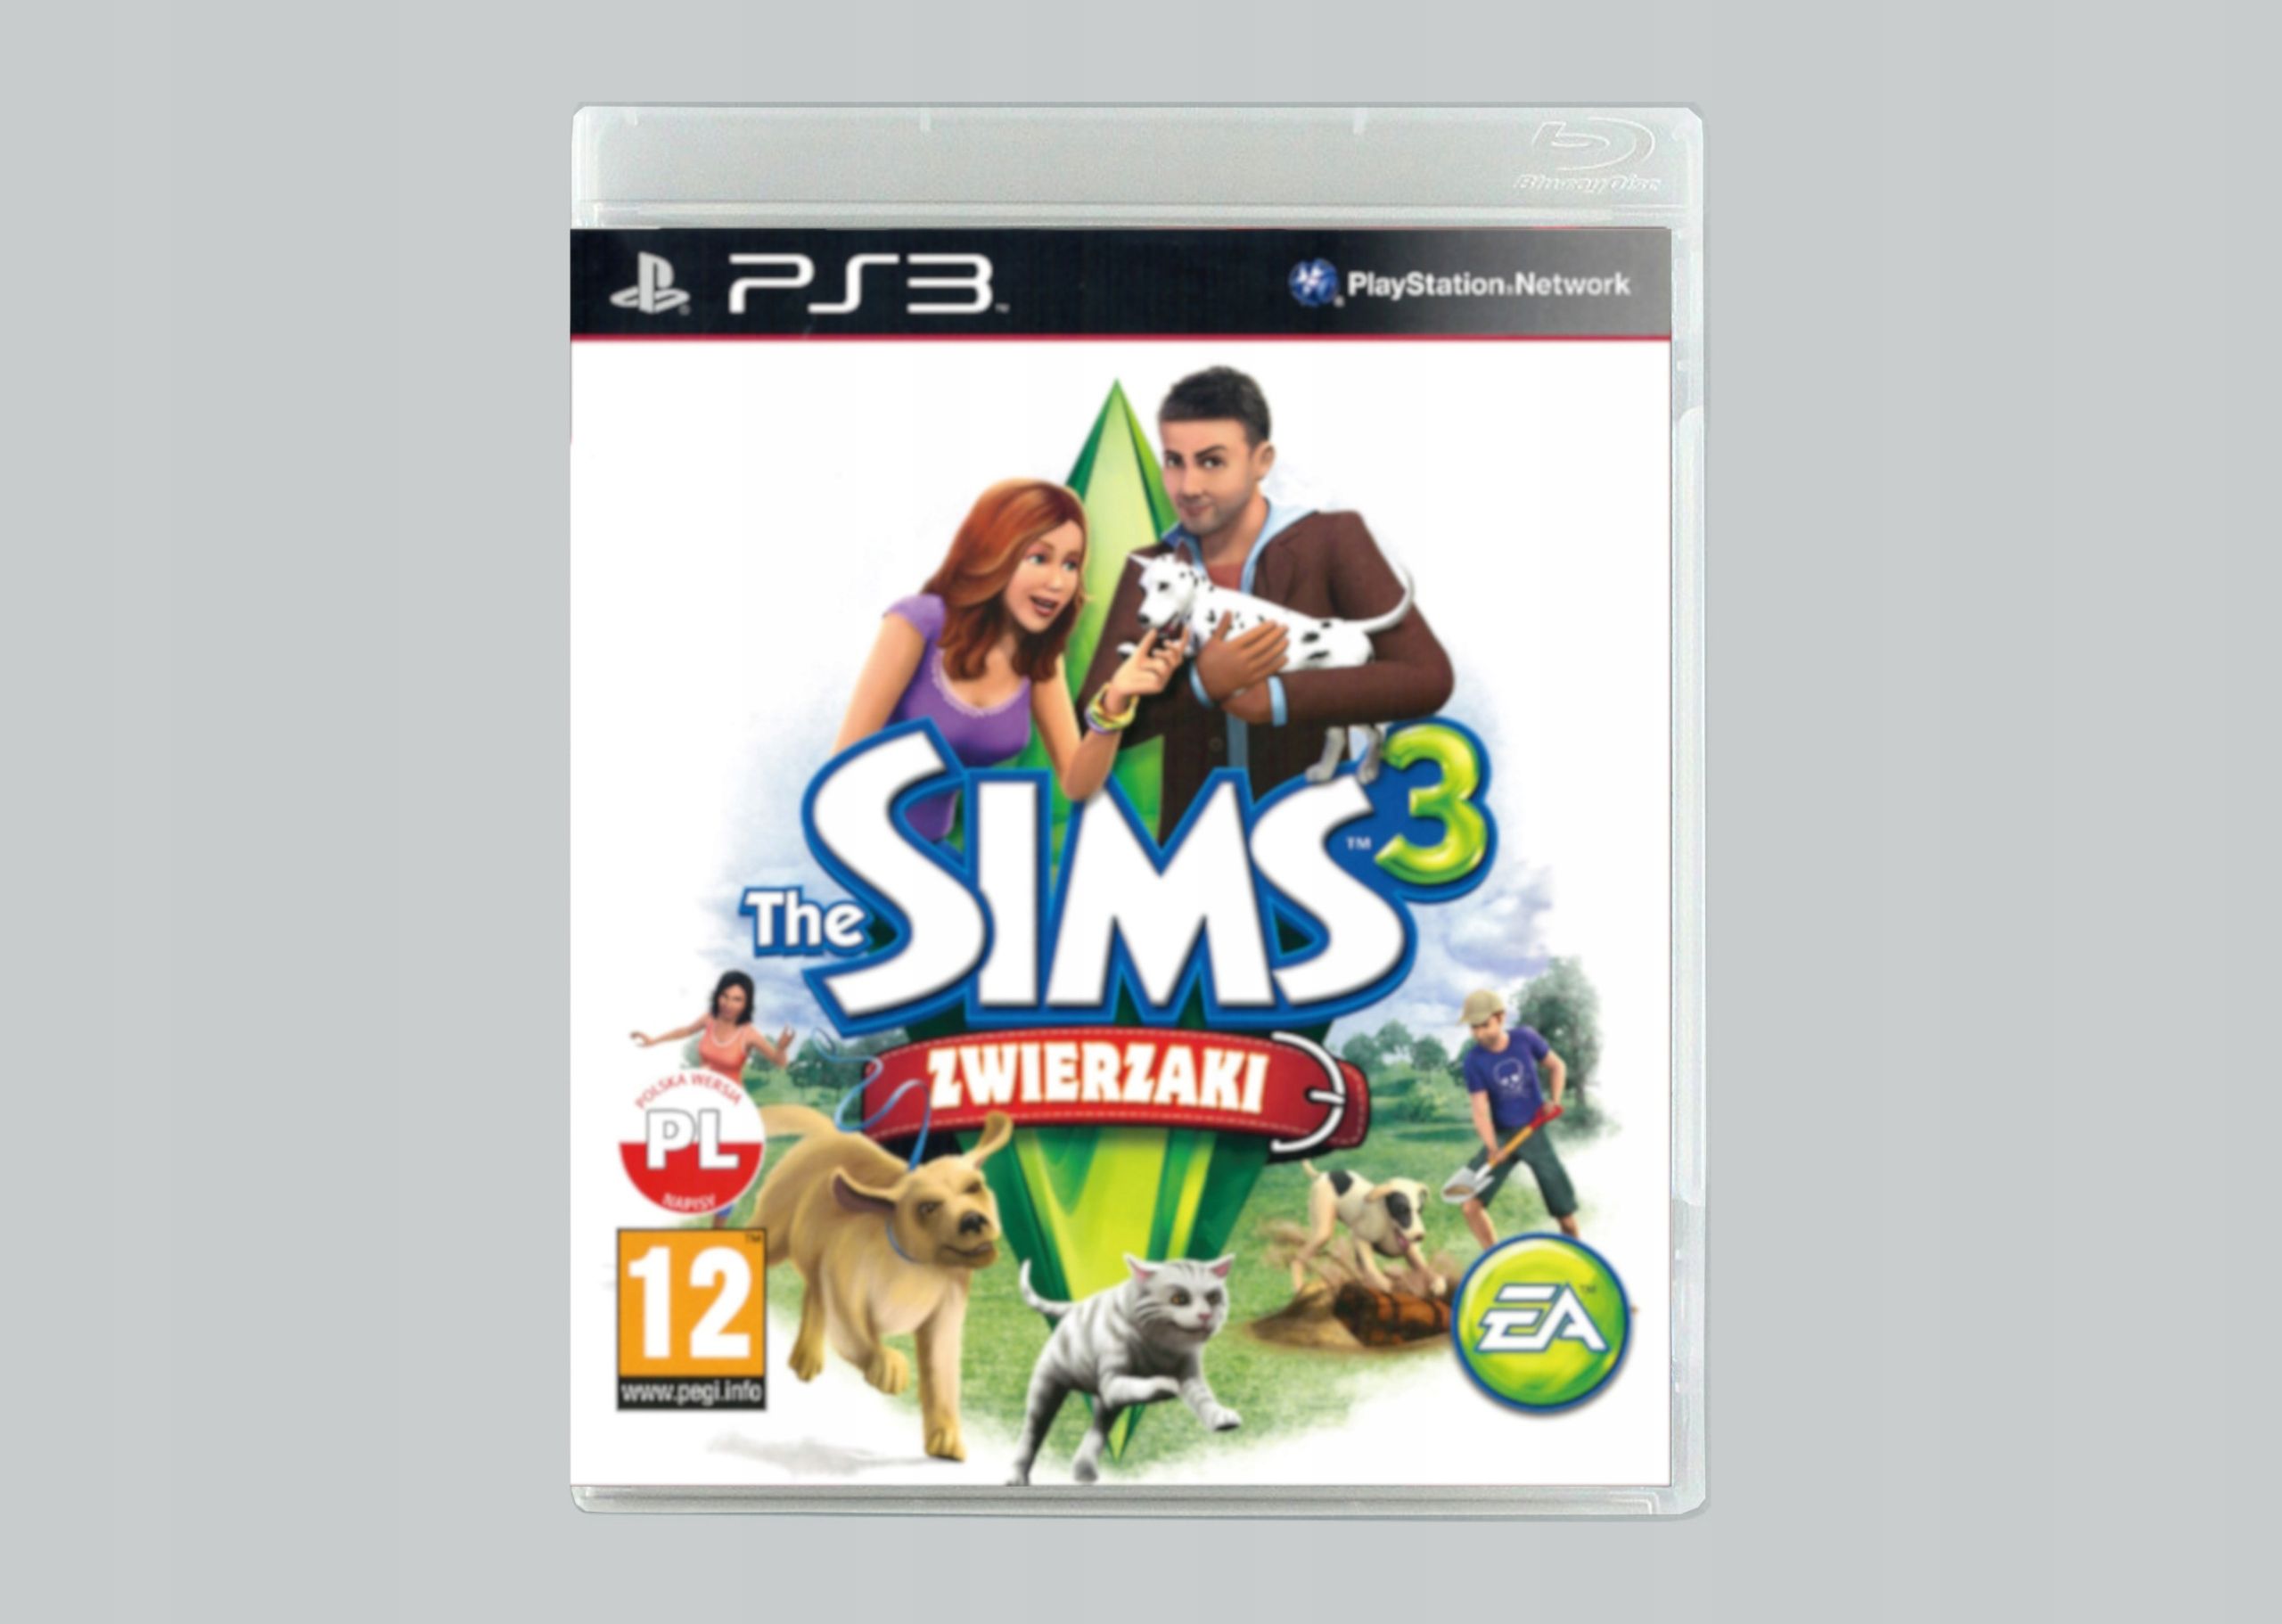 Pet 3 book. SIMS 3 Pets ps3. SIMS 3 питомцы ps3. The SIMS 3: Pets (для игровых приставок). The SIMS 2 Pets ps3.